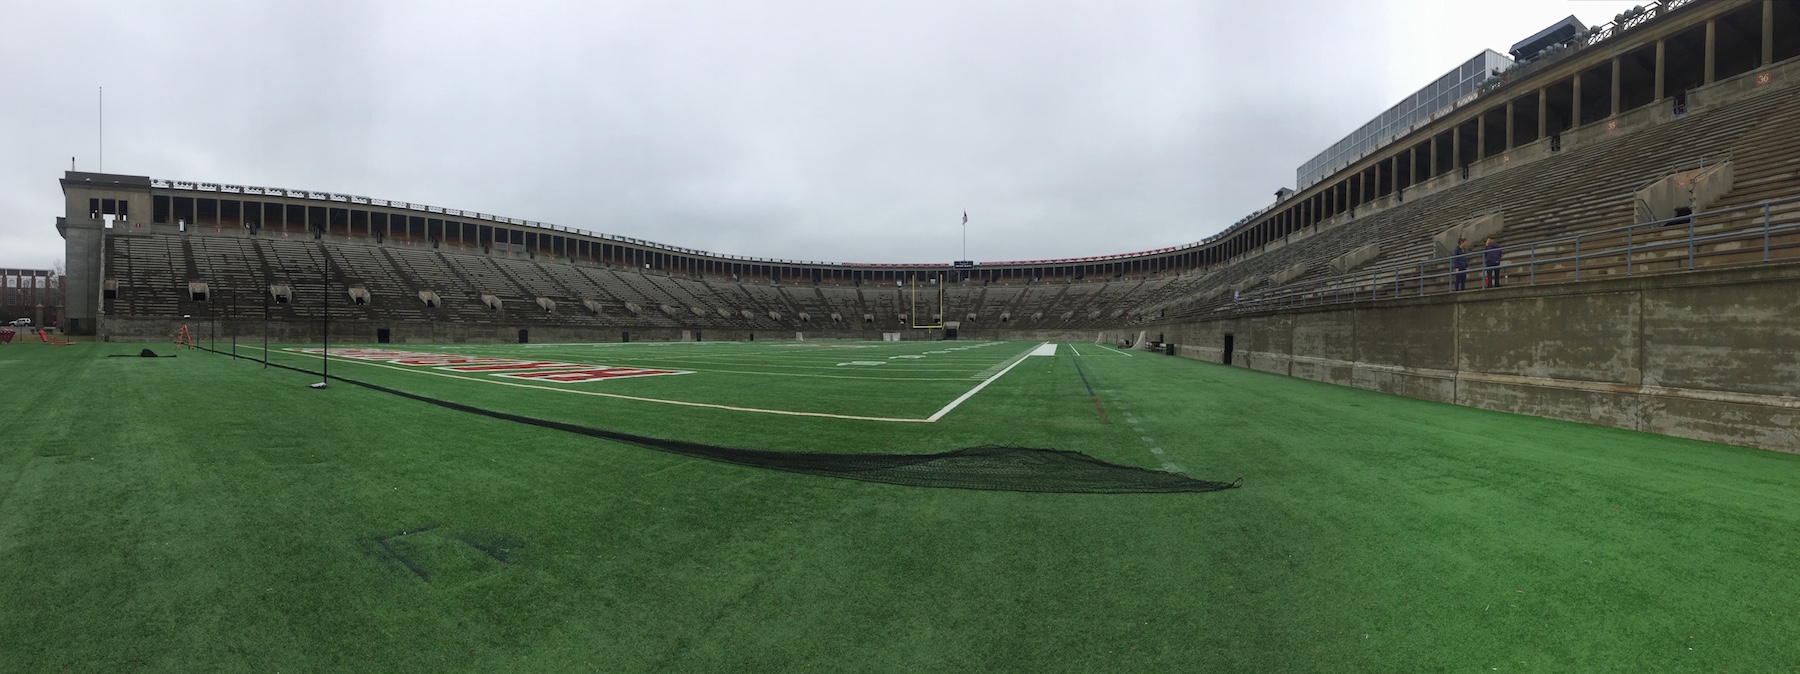 View of Harvard Stadium from the back-end zone before they took the field for the tour.